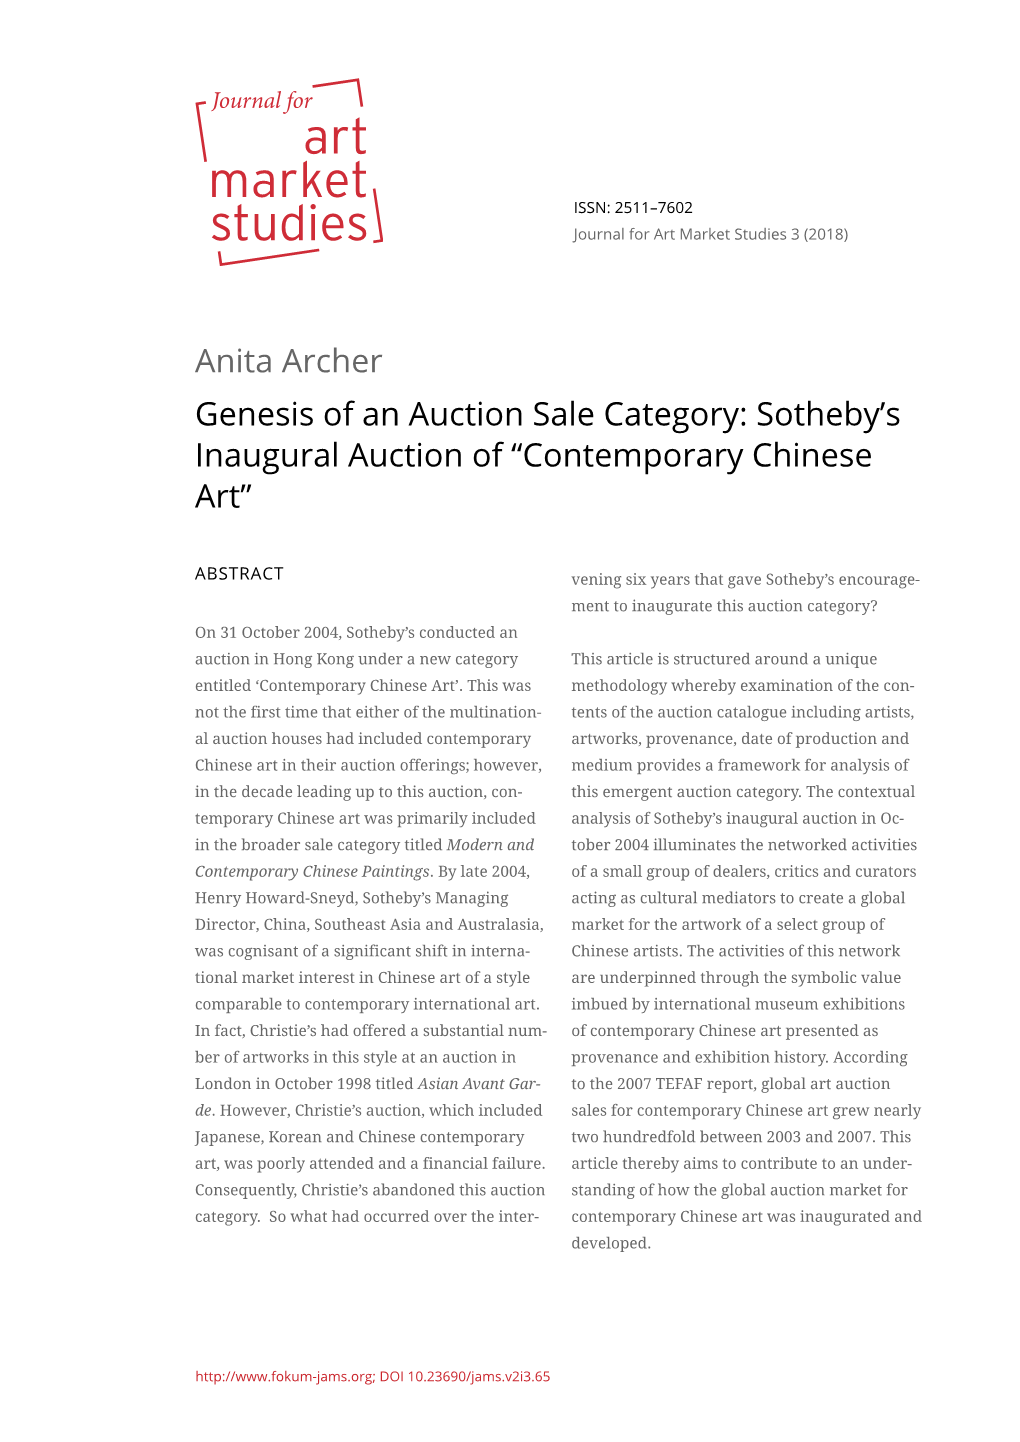 Anita Archer Genesis of an Auction Sale Category: Sotheby’S Inaugural Auction of “Contemporary Chinese Art”